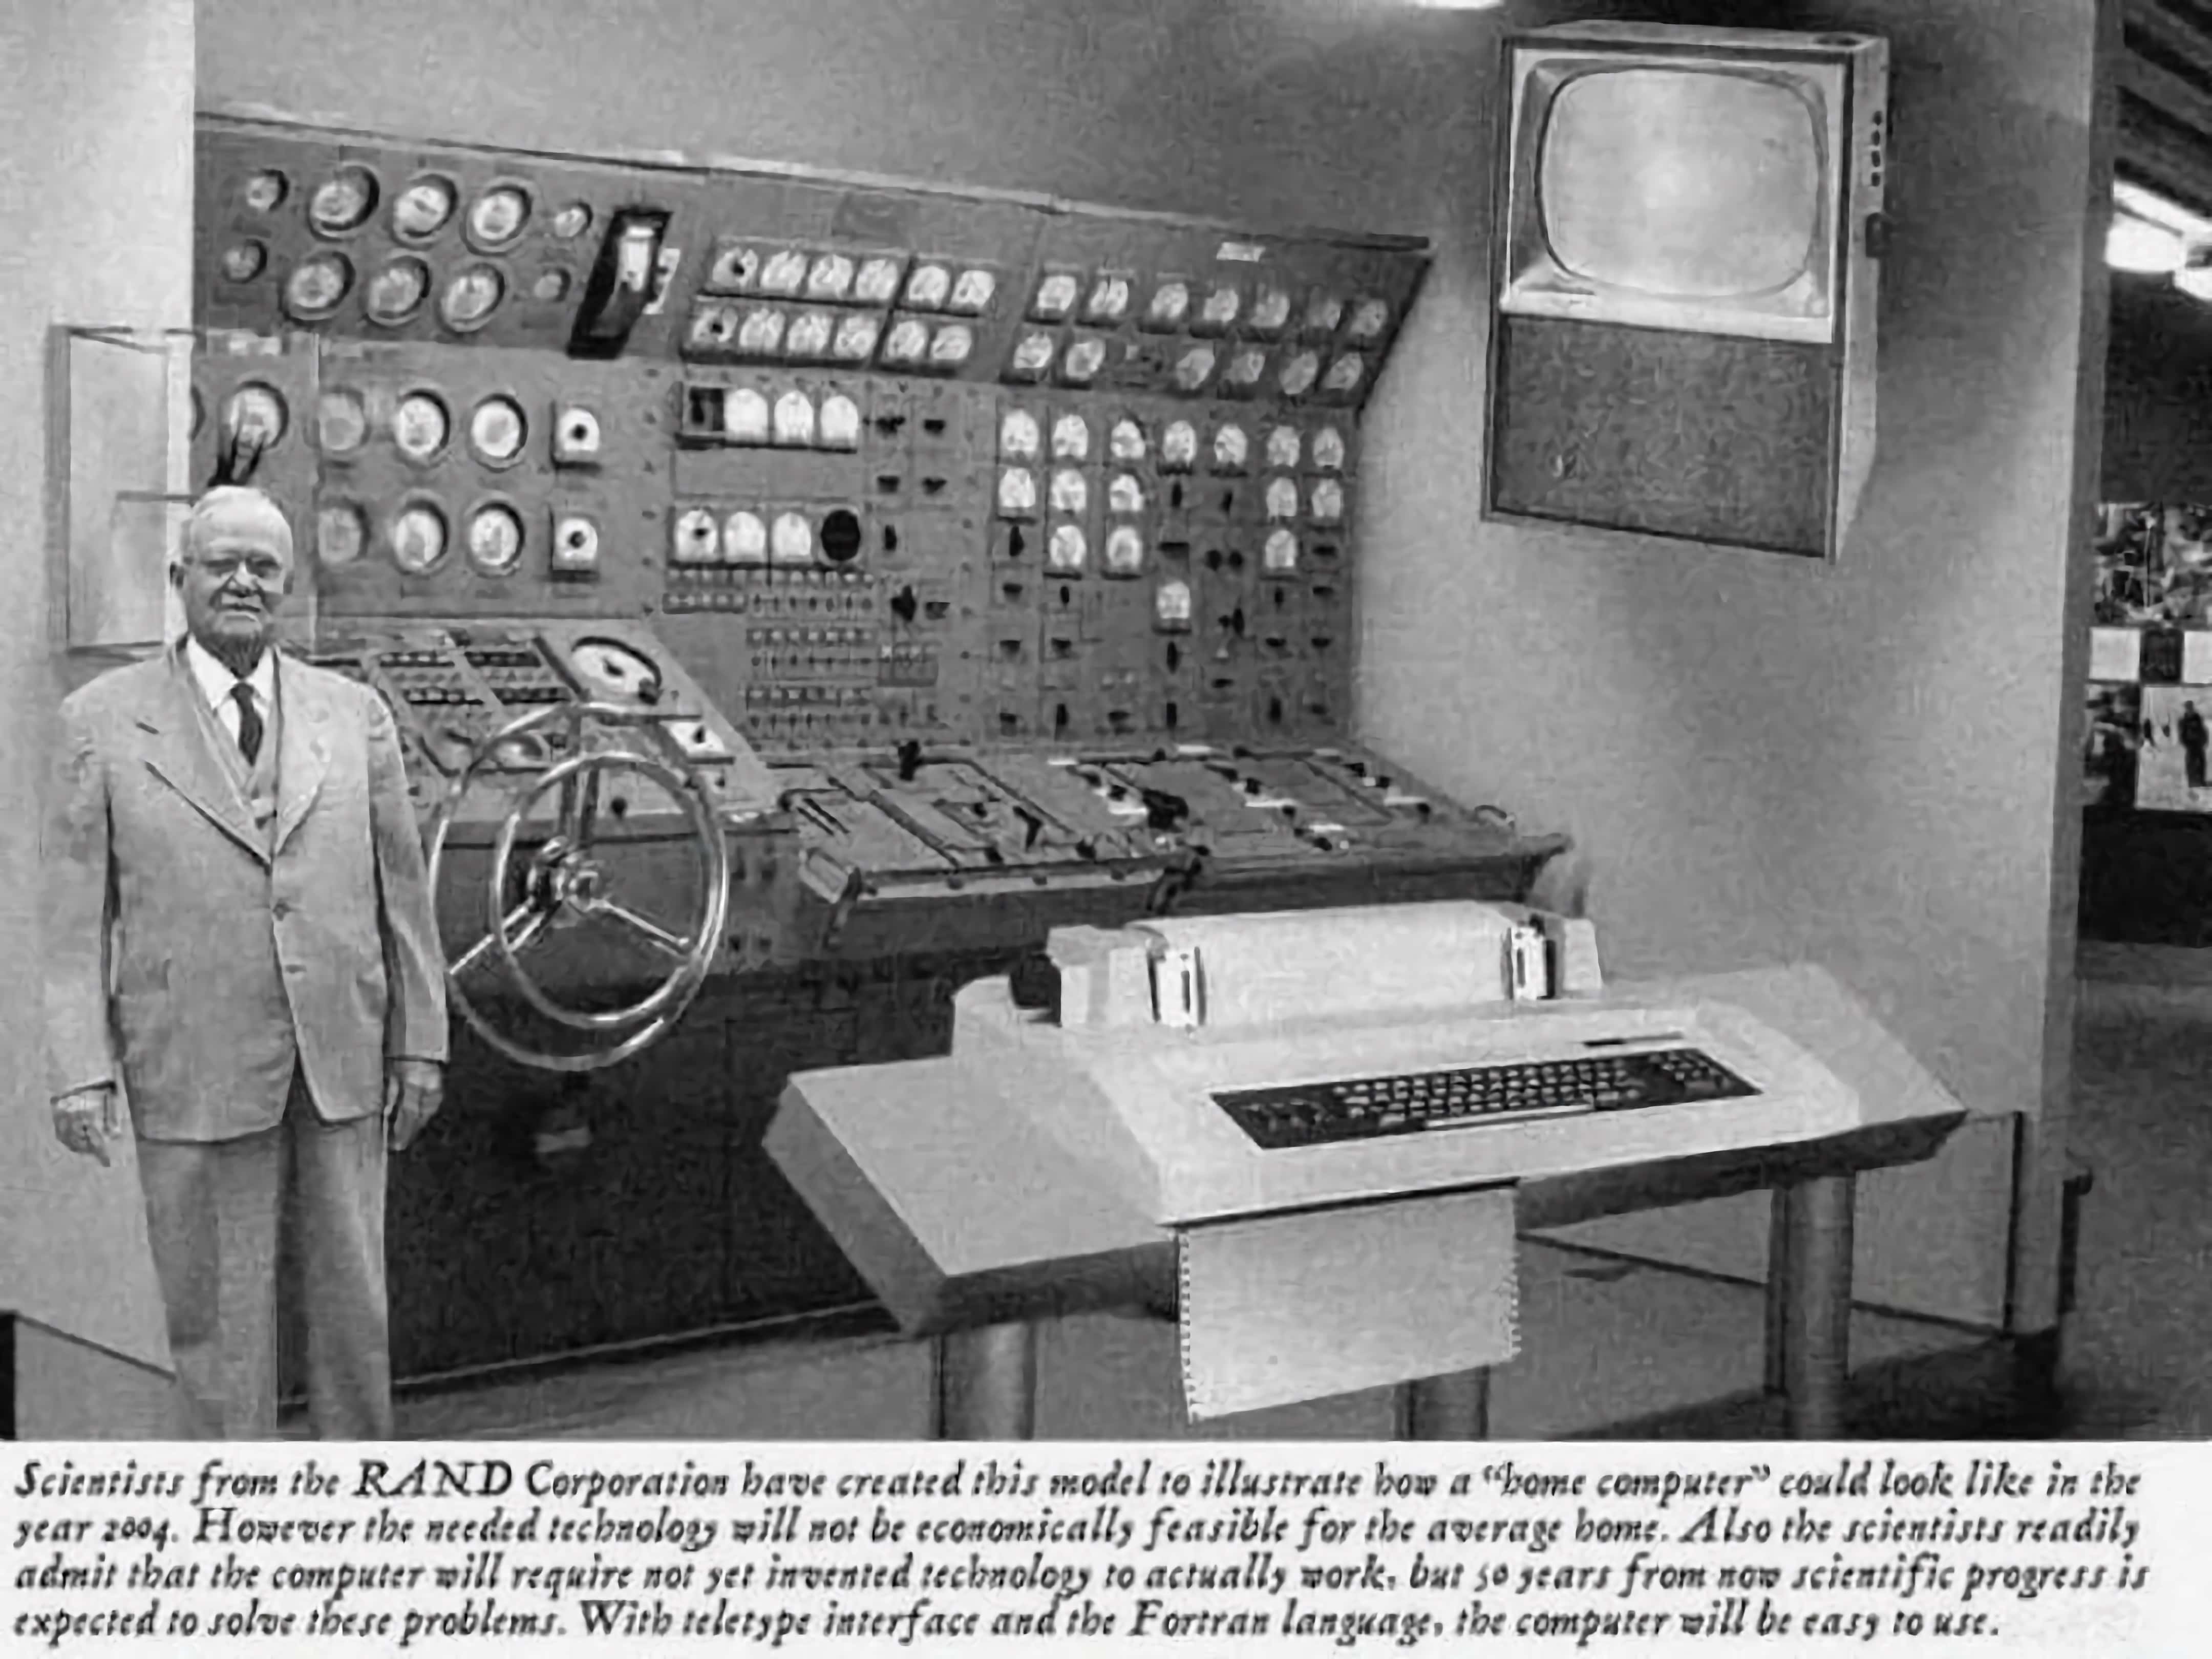 Predicting the Computer of 2004 in 1954.